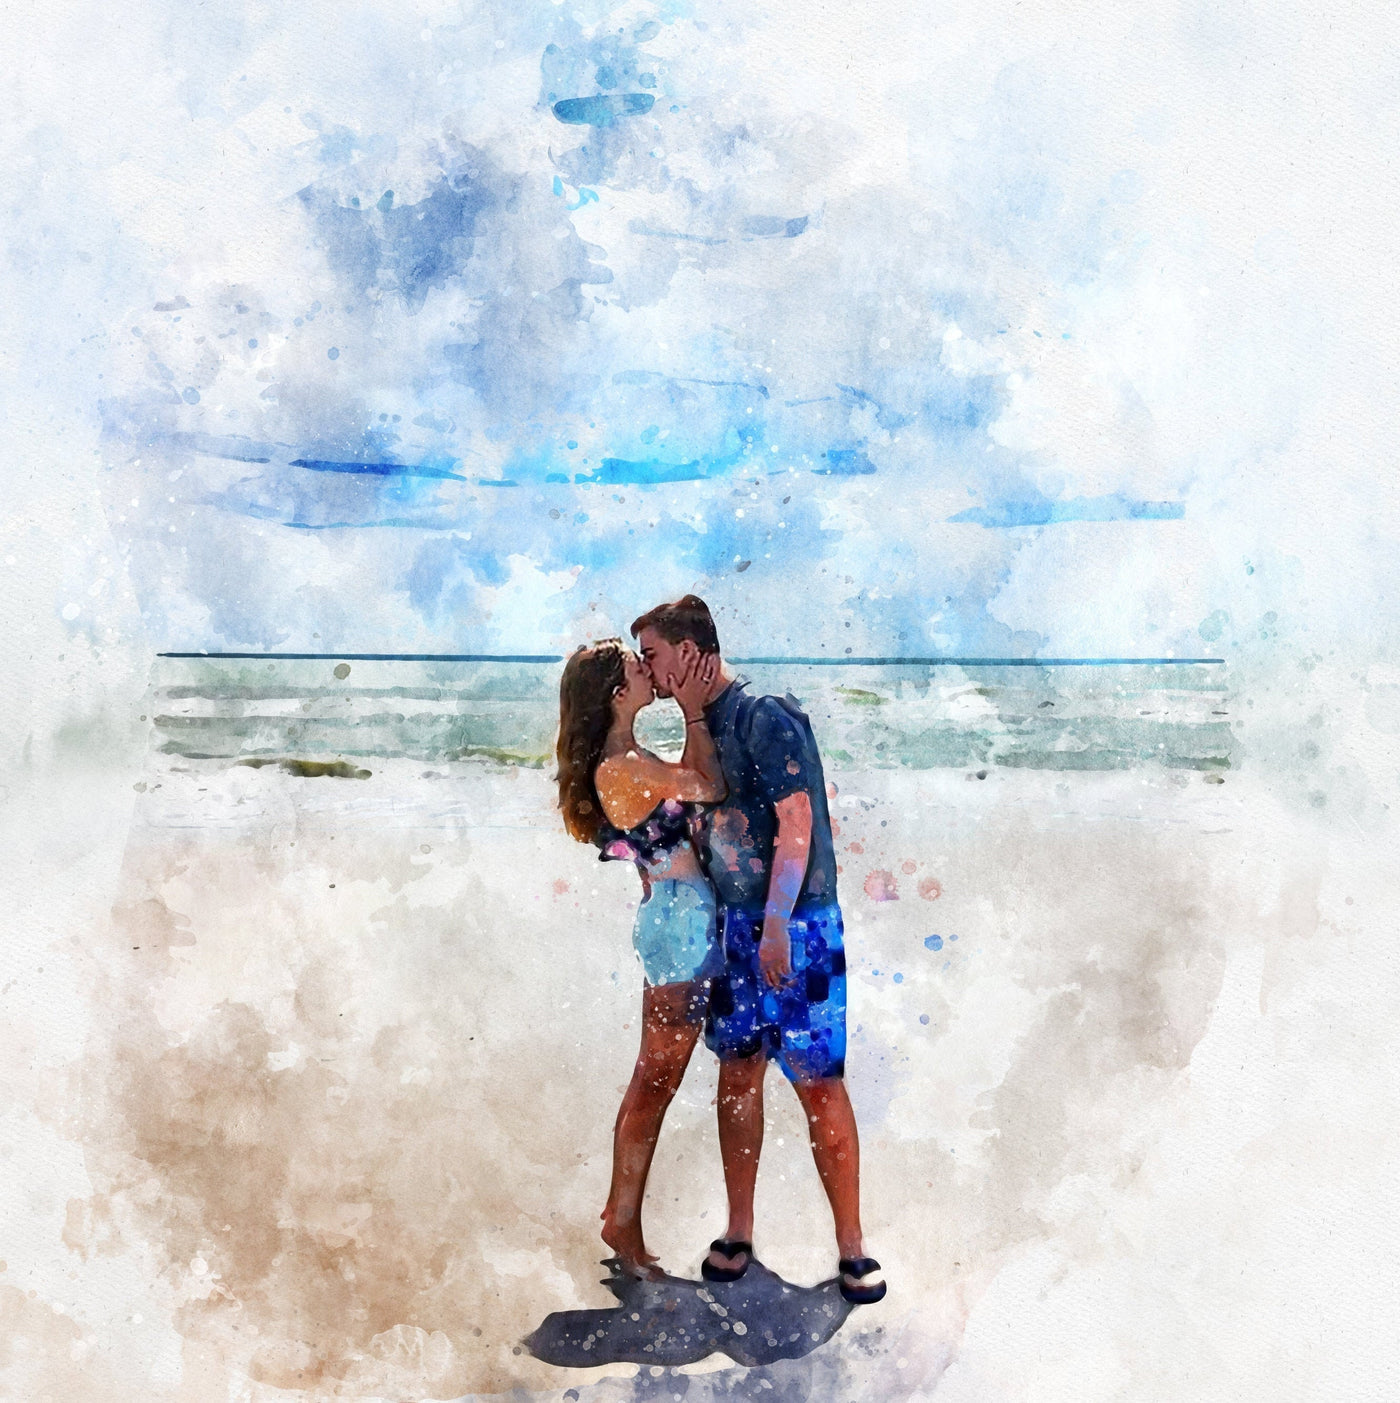 Personalized Watercolor Portrait from Photo - Perfect Honeymoon or Wedding Gift